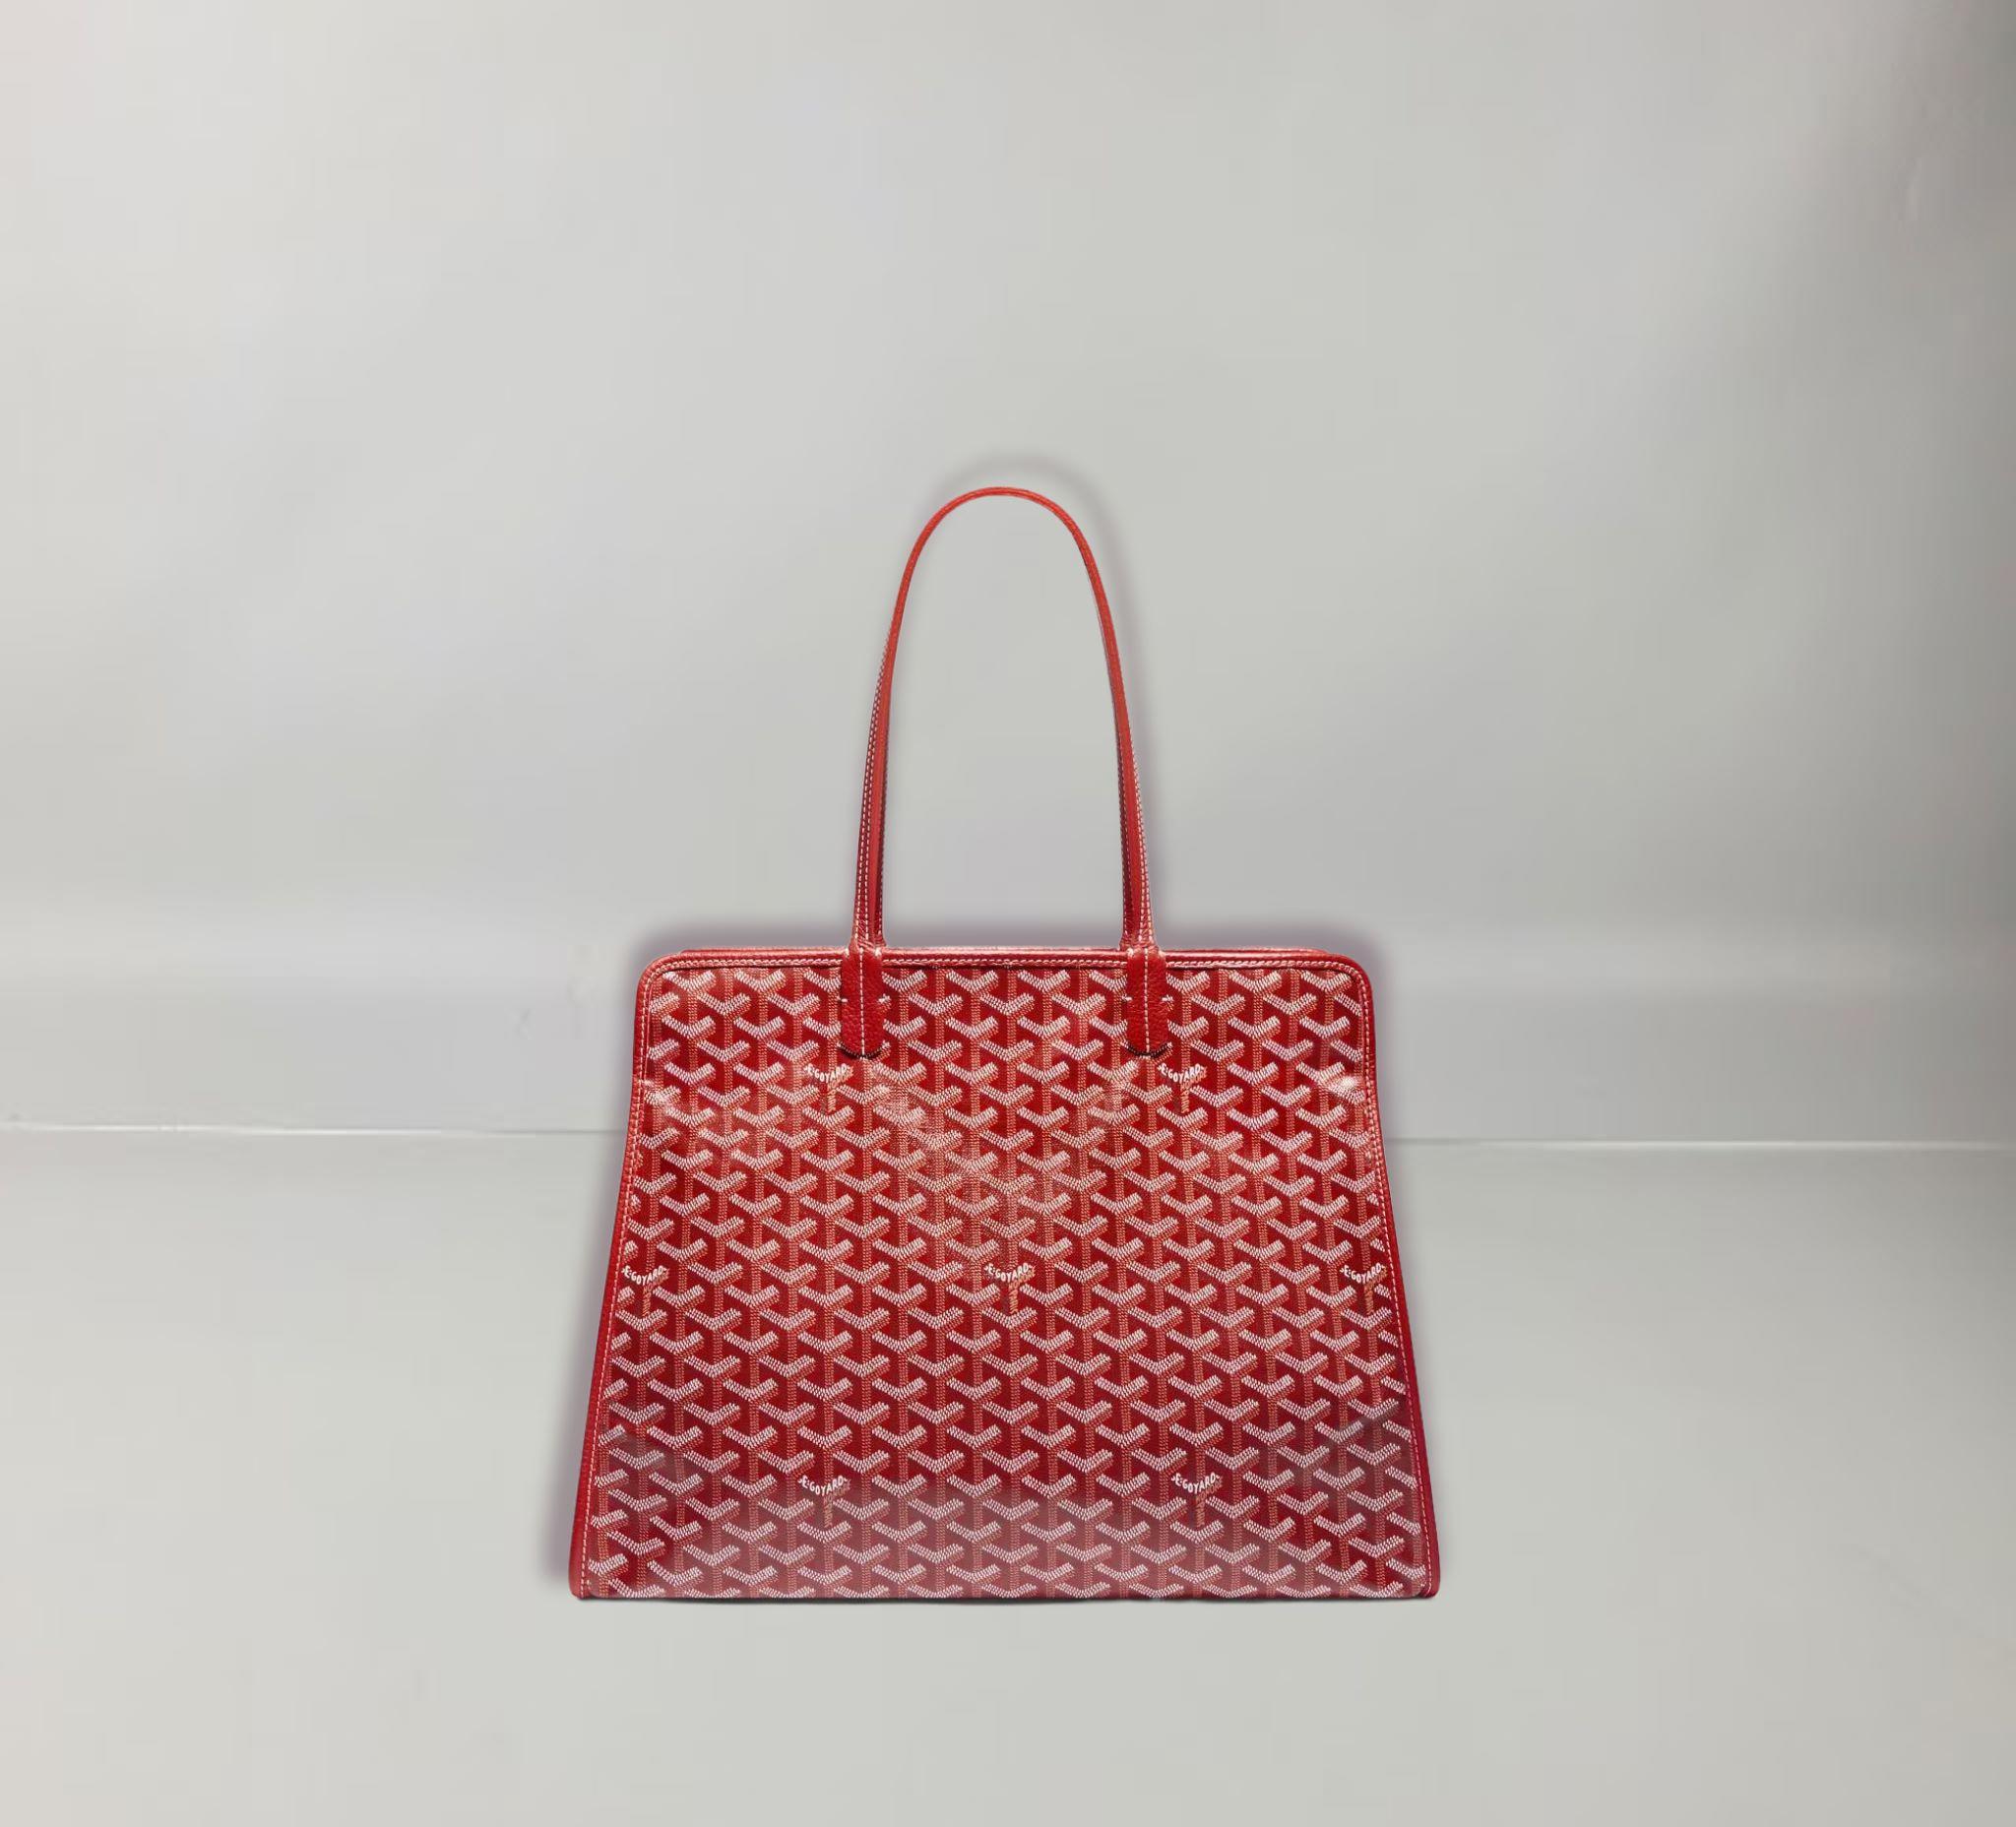 Goyard's Bag dont have cardboard box, it will  be ship with dust bag and authenticity card
The Hardy PM bag is ideal for everyday use or work because it can easily carry A4 files. It is perfect for people looking for lightness, extreme flexibility